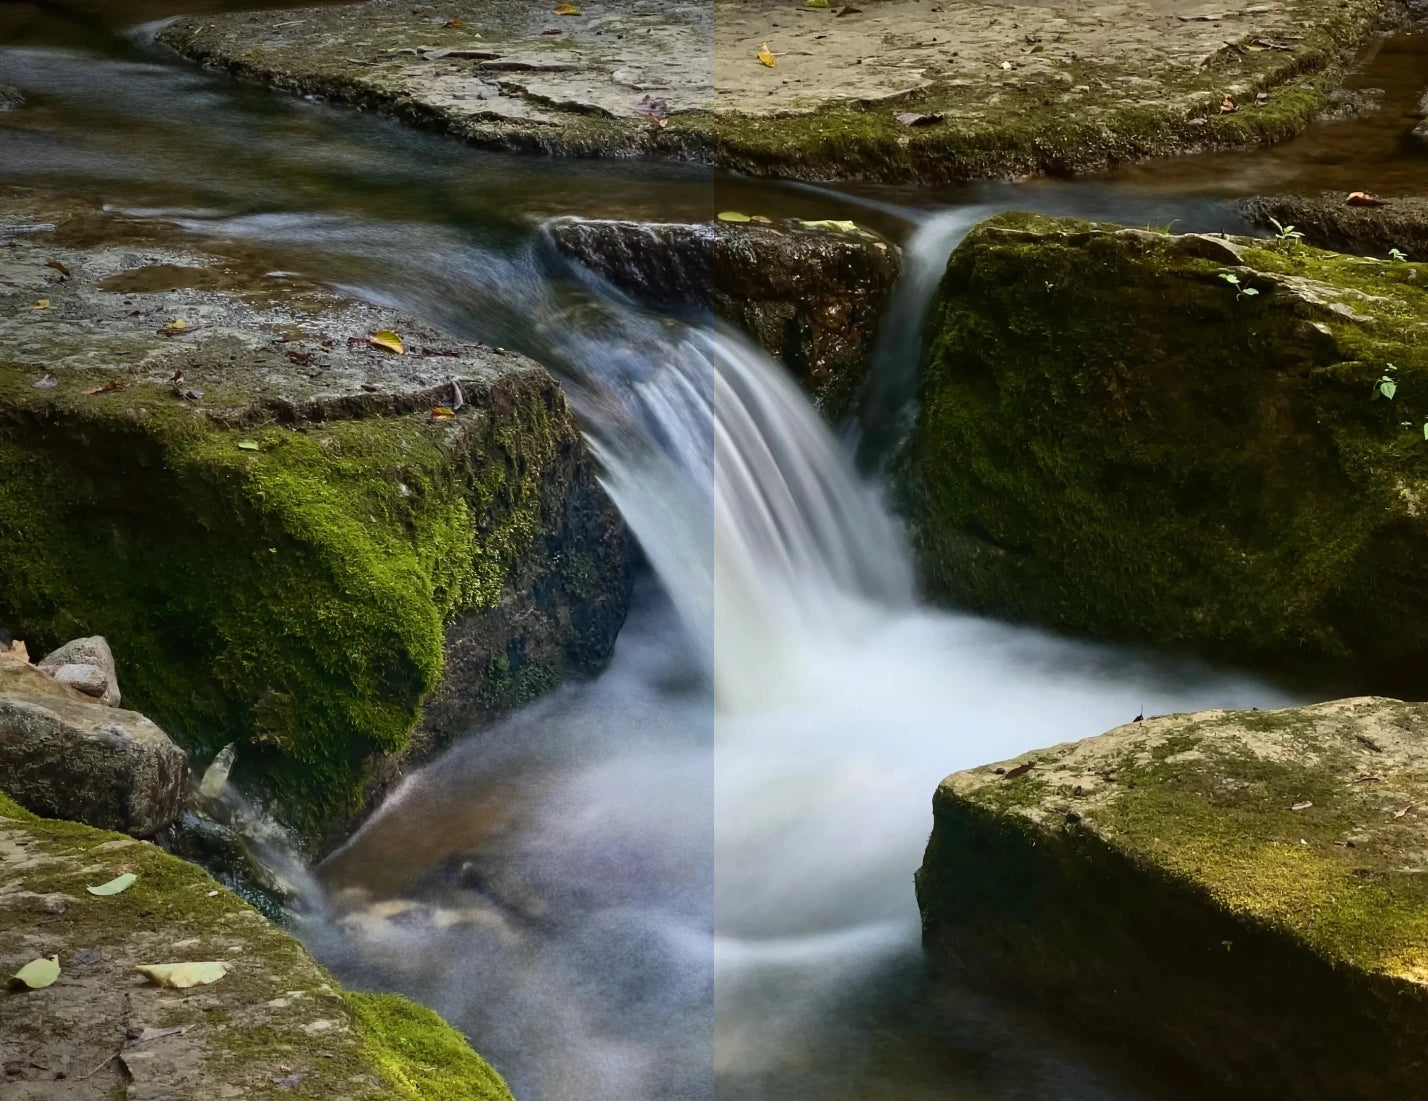 ND Filters and Long Exposure on iPhone explained - by Greg McMillan